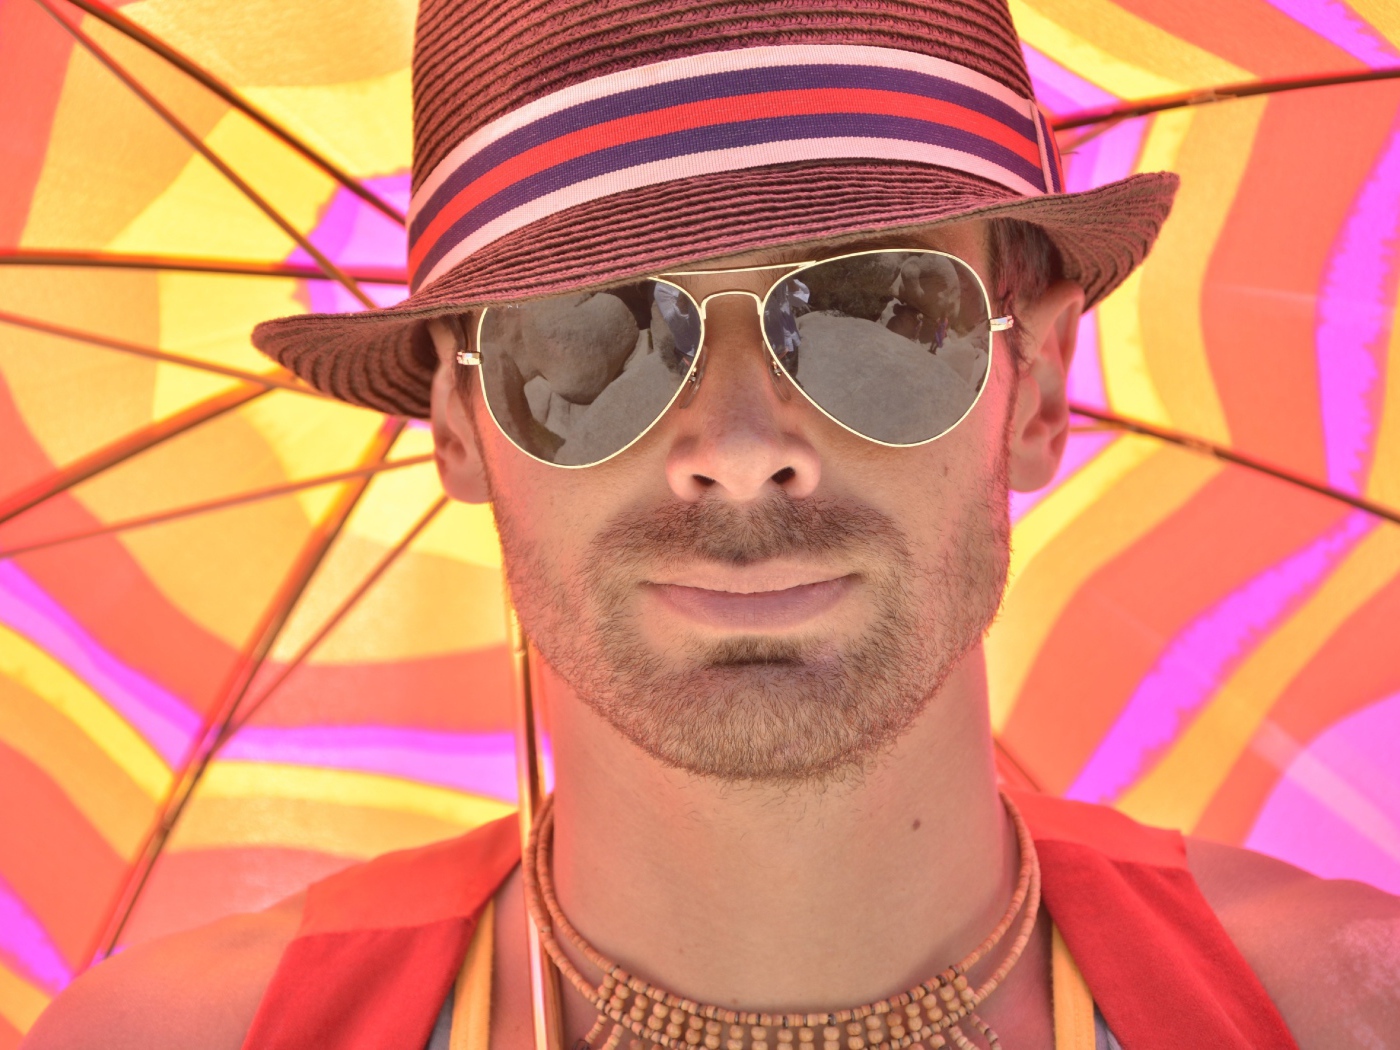 A man in sunglasses and a summer hat